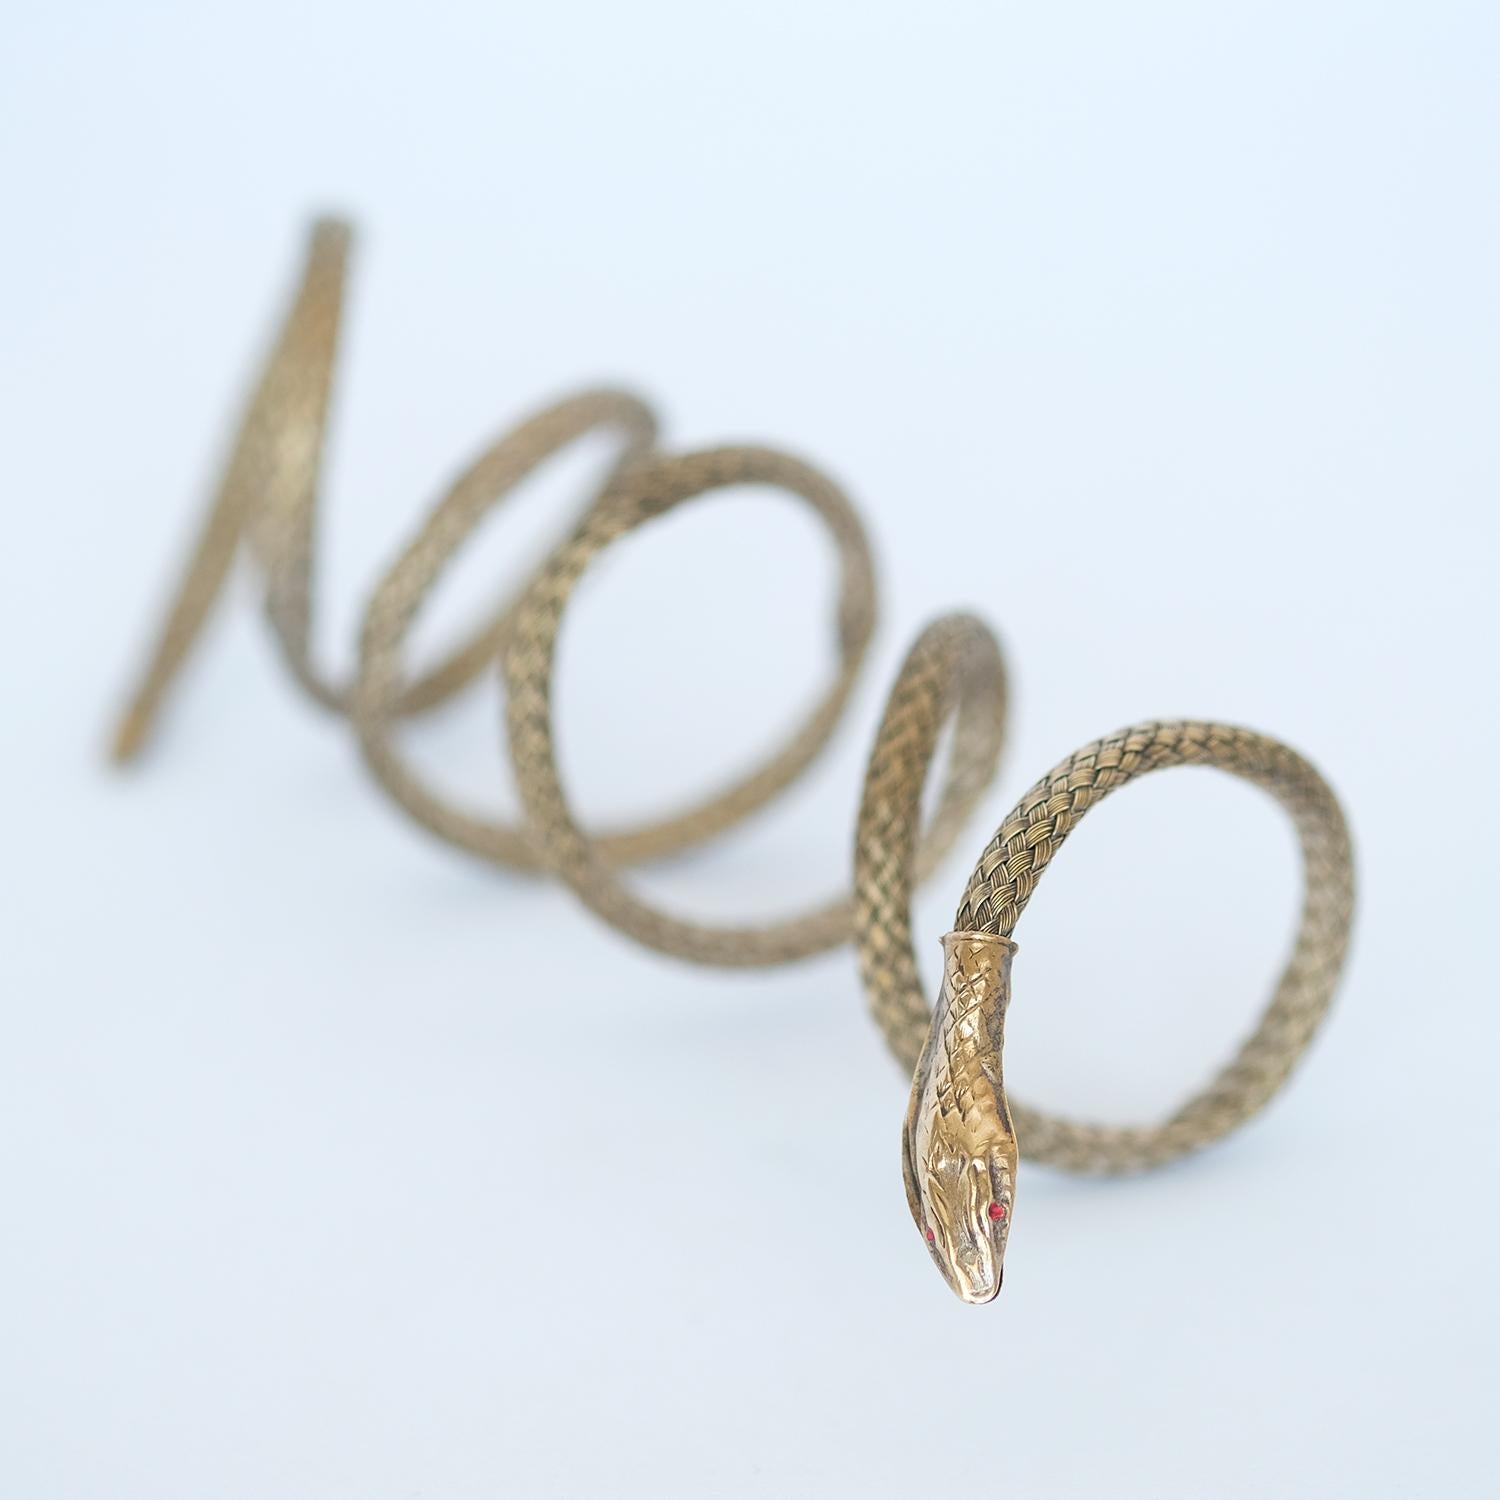 Bracelet in the shape of an Articulated Snake, Gilded Brass, Late 19th C. In Good Condition For Sale In Stockholm, SE